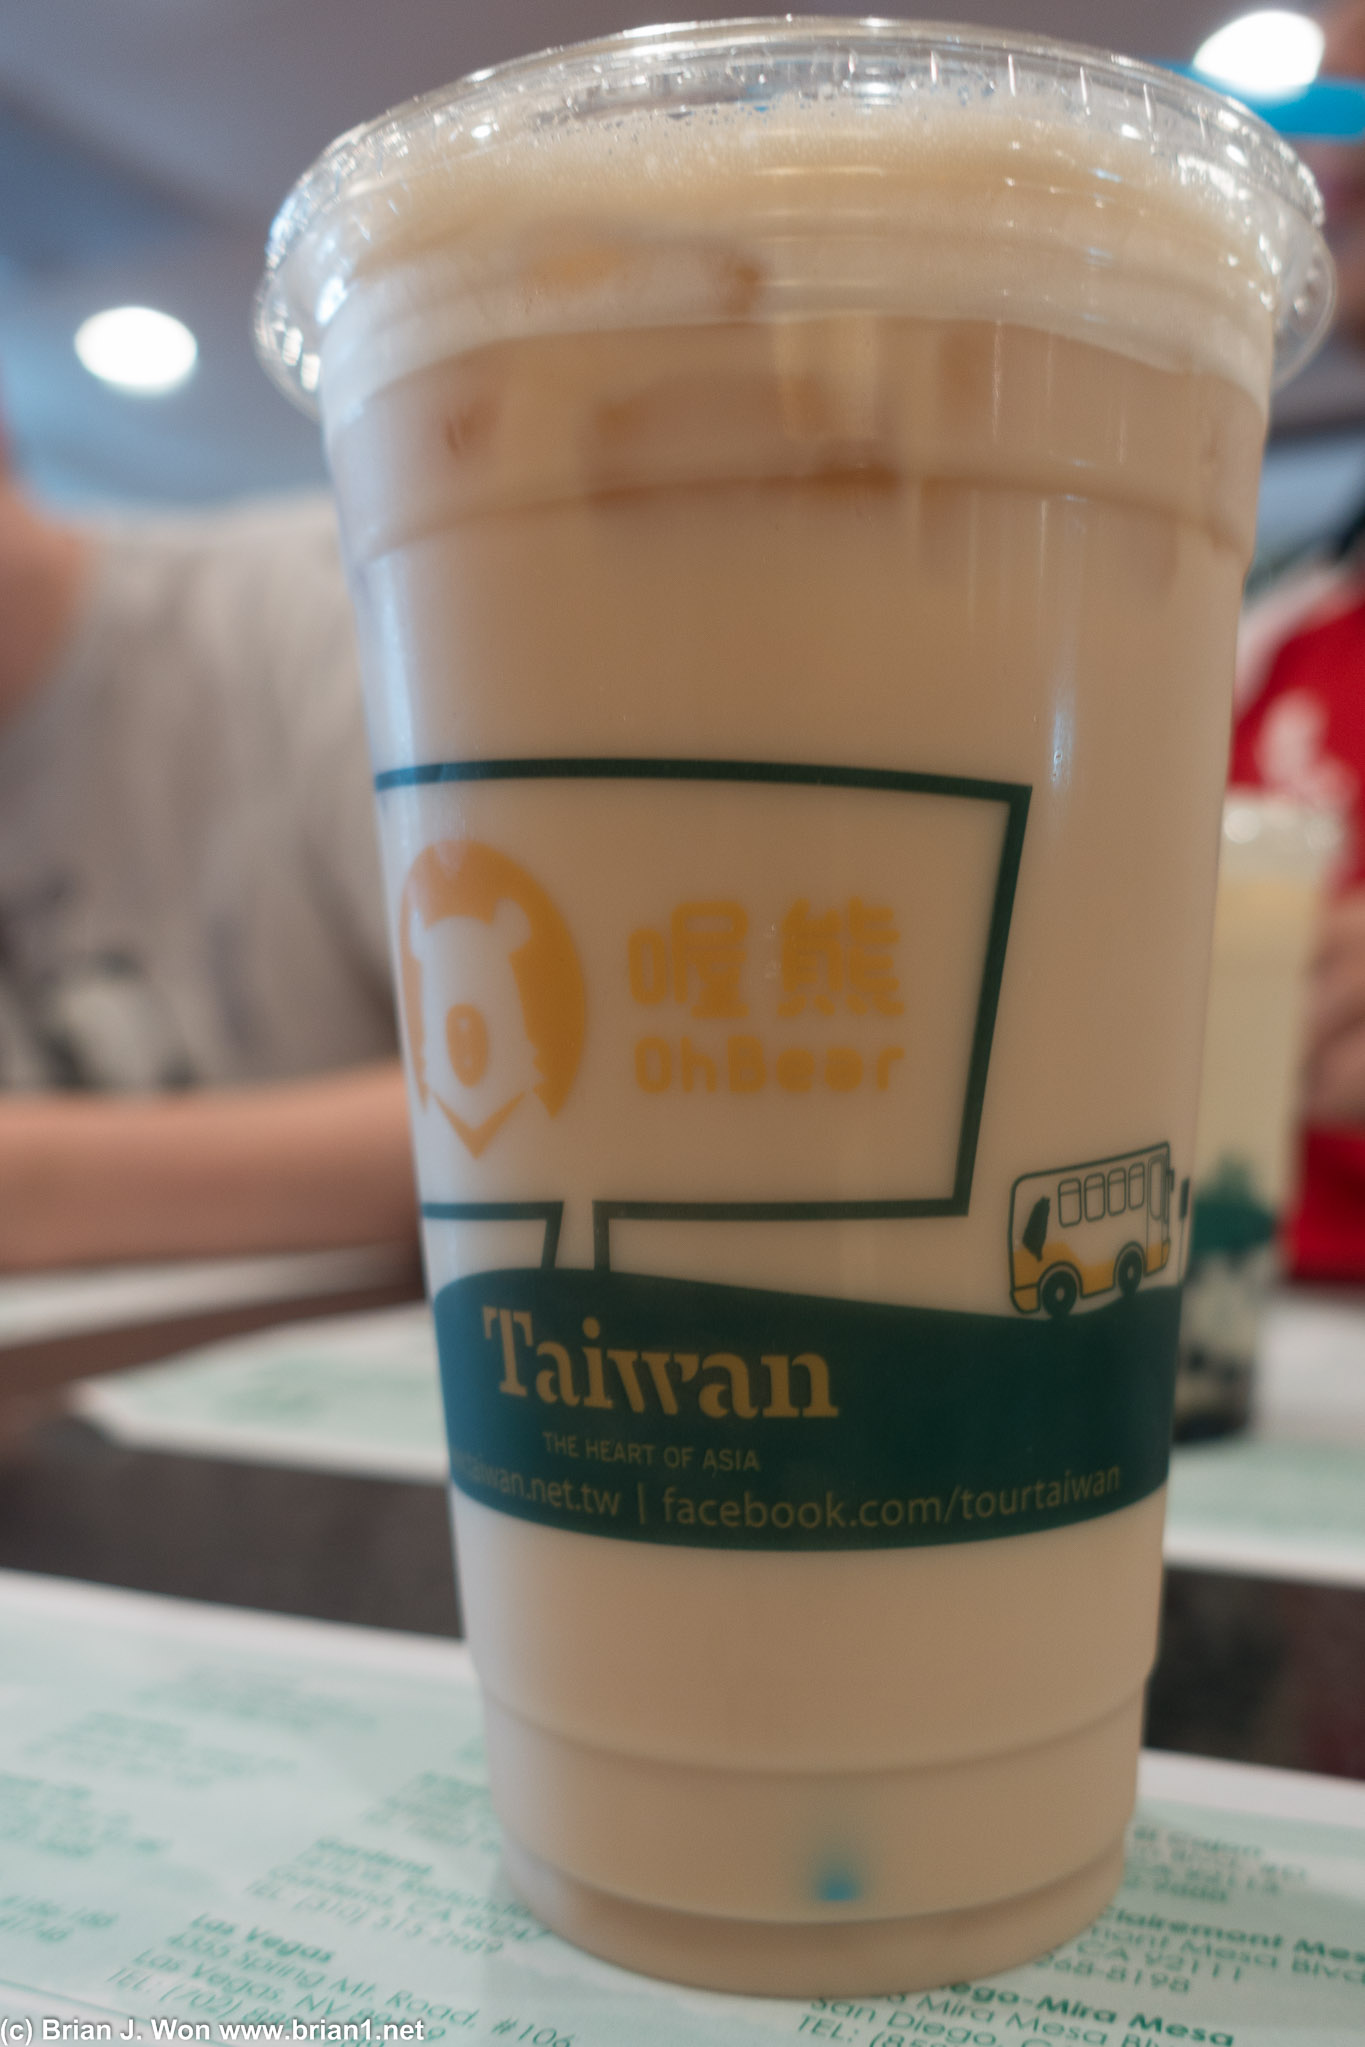 Large almond milk tea was this month's special. $3.99!